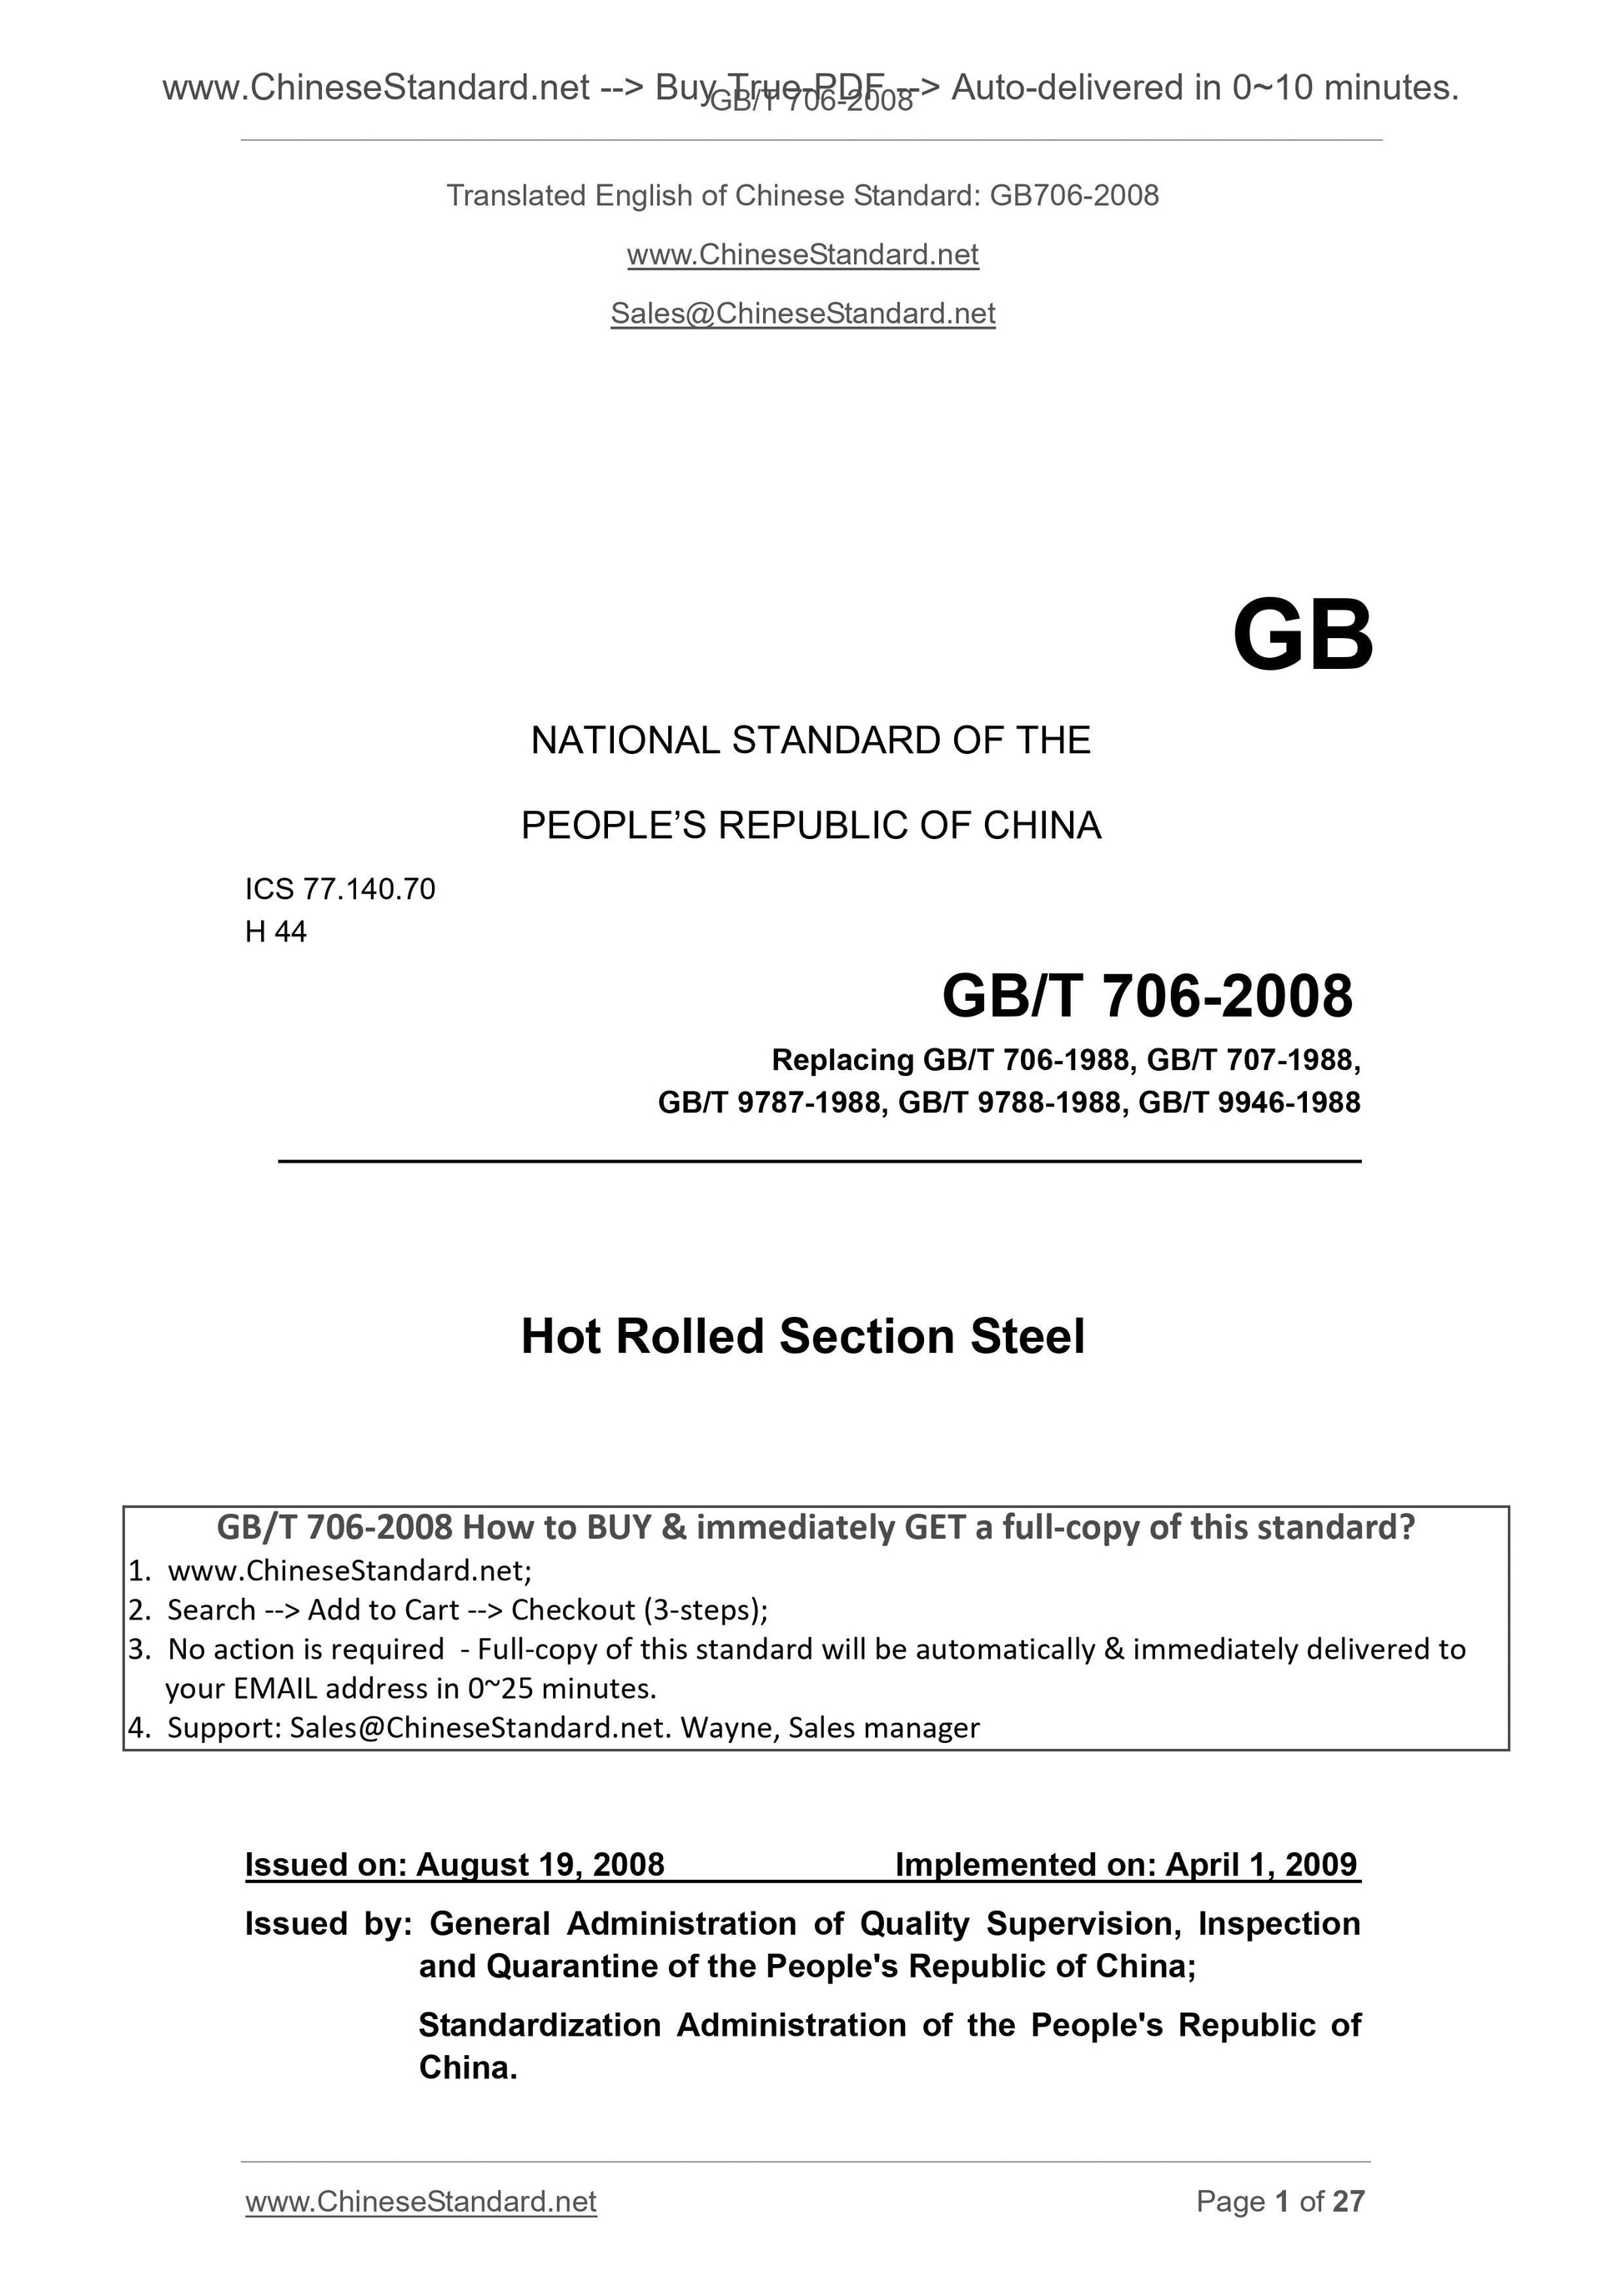 GB/T 706-2008 Page 1